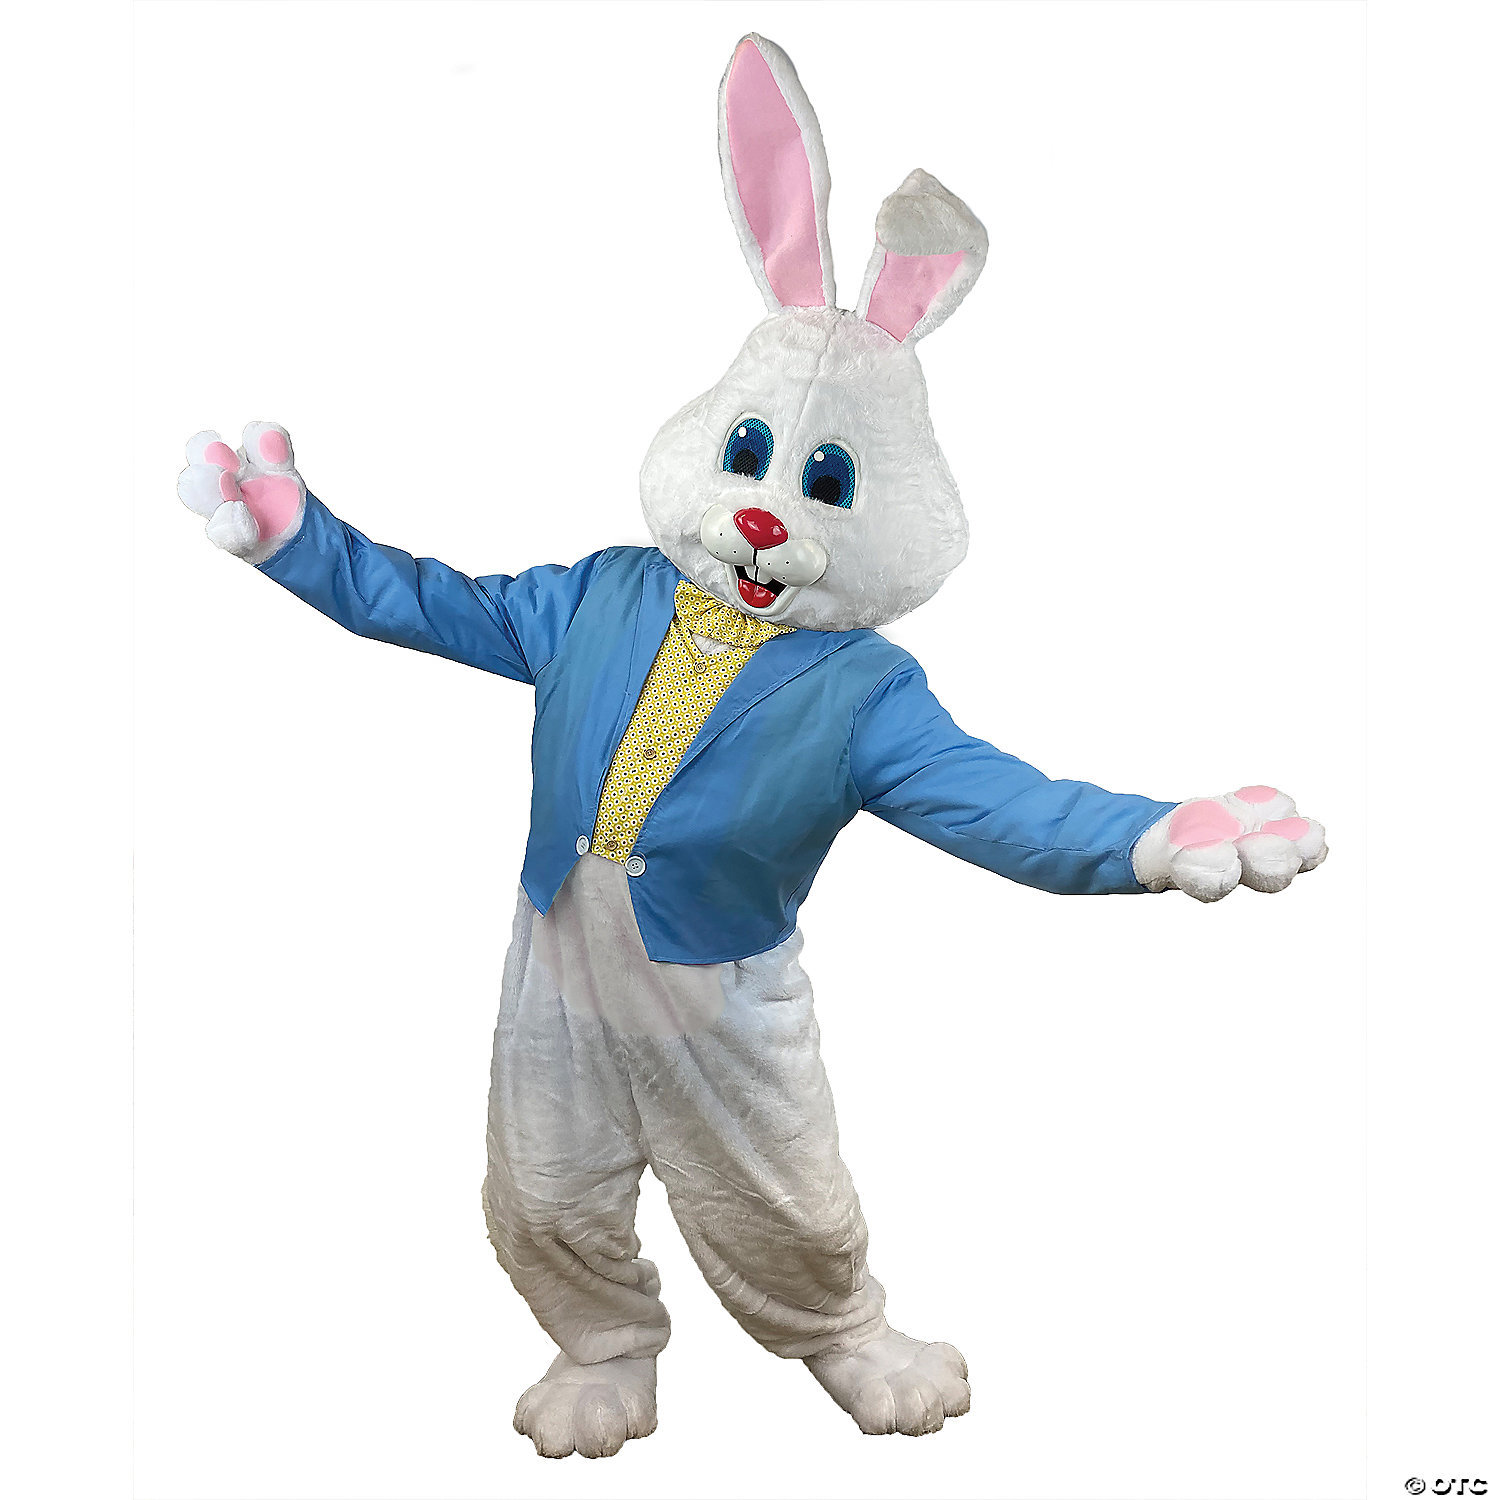 ADLT EASTER BUNNY FAUX YELLOW VEST - EASTER